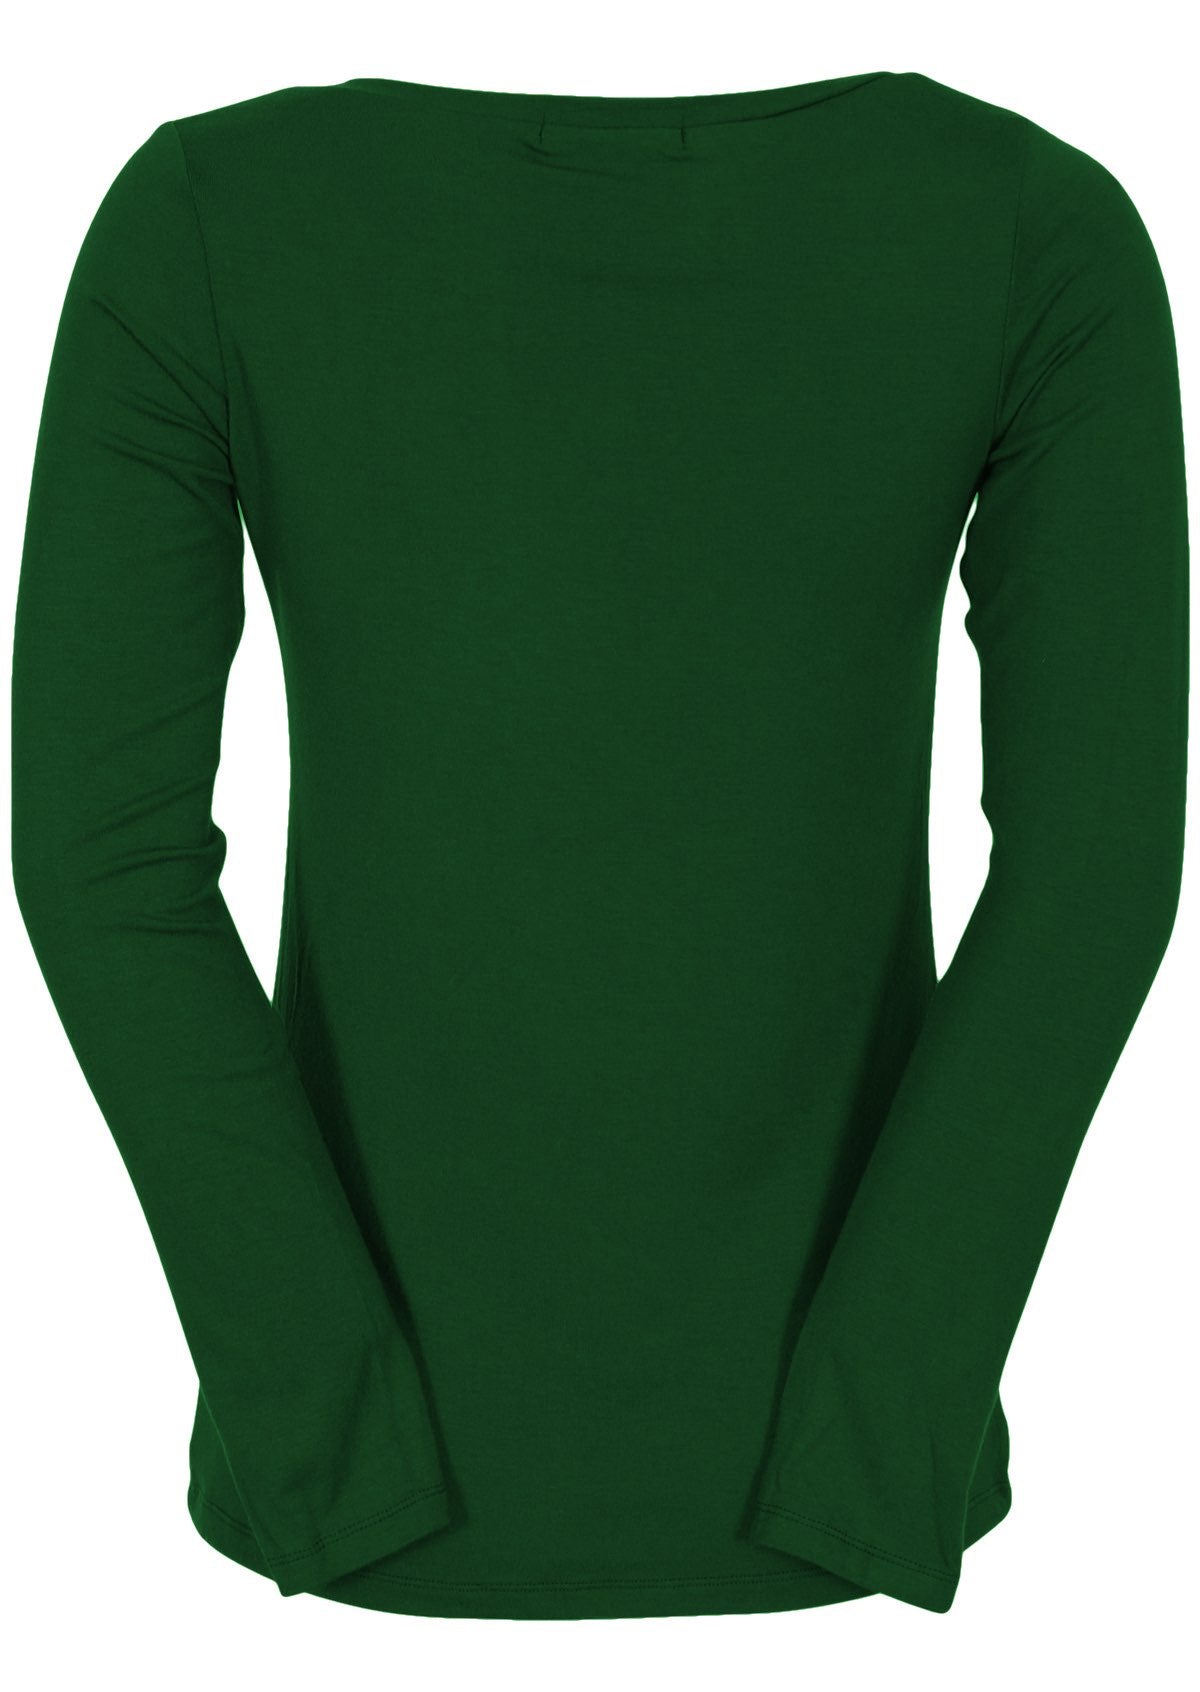 Back view of women's green long sleeve stretch v-neck soft rayon top.